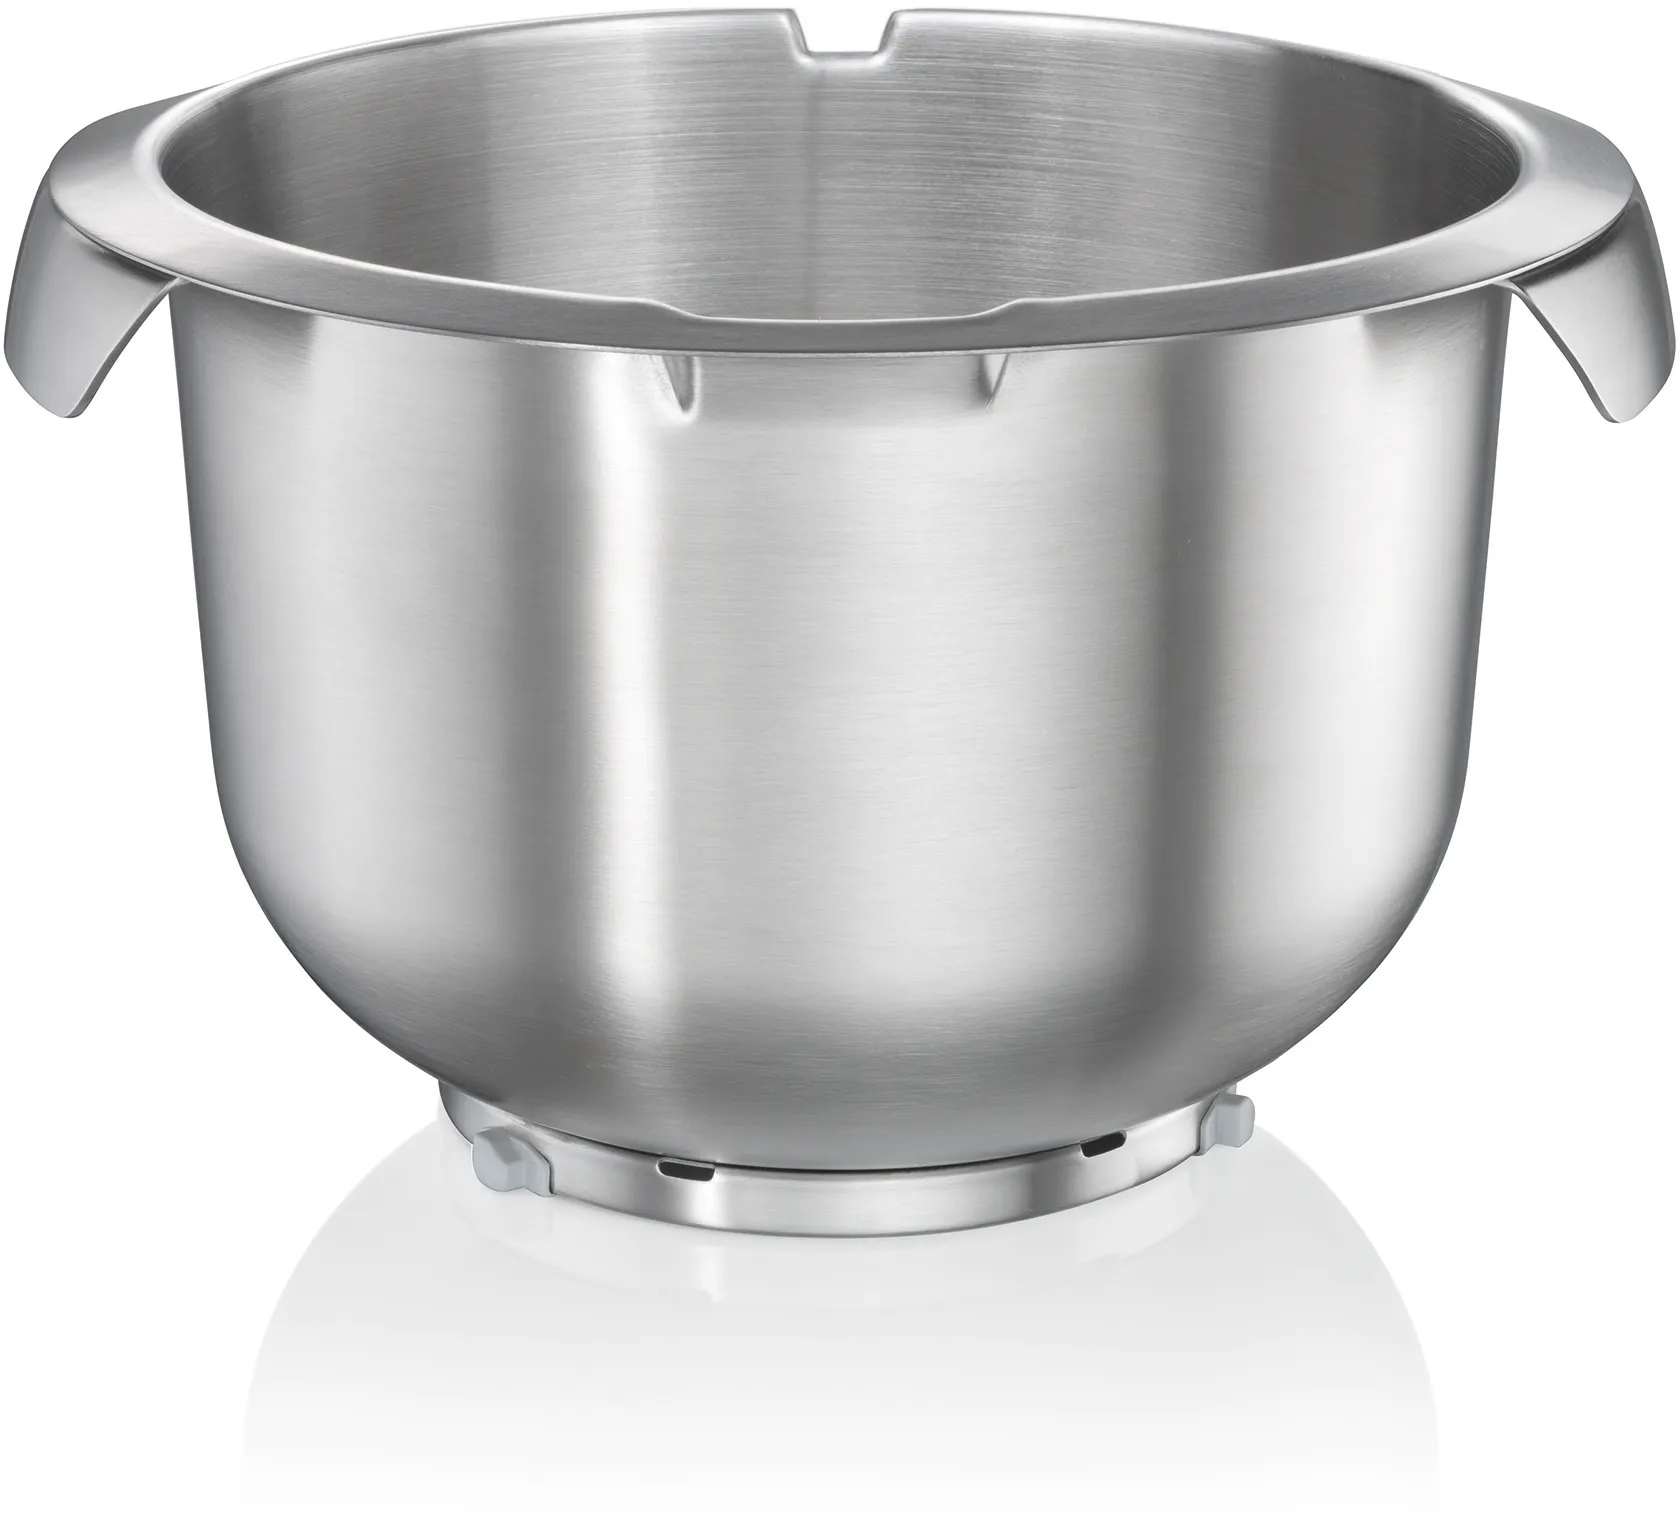 Stainless steel mixing bowl 5.4l 